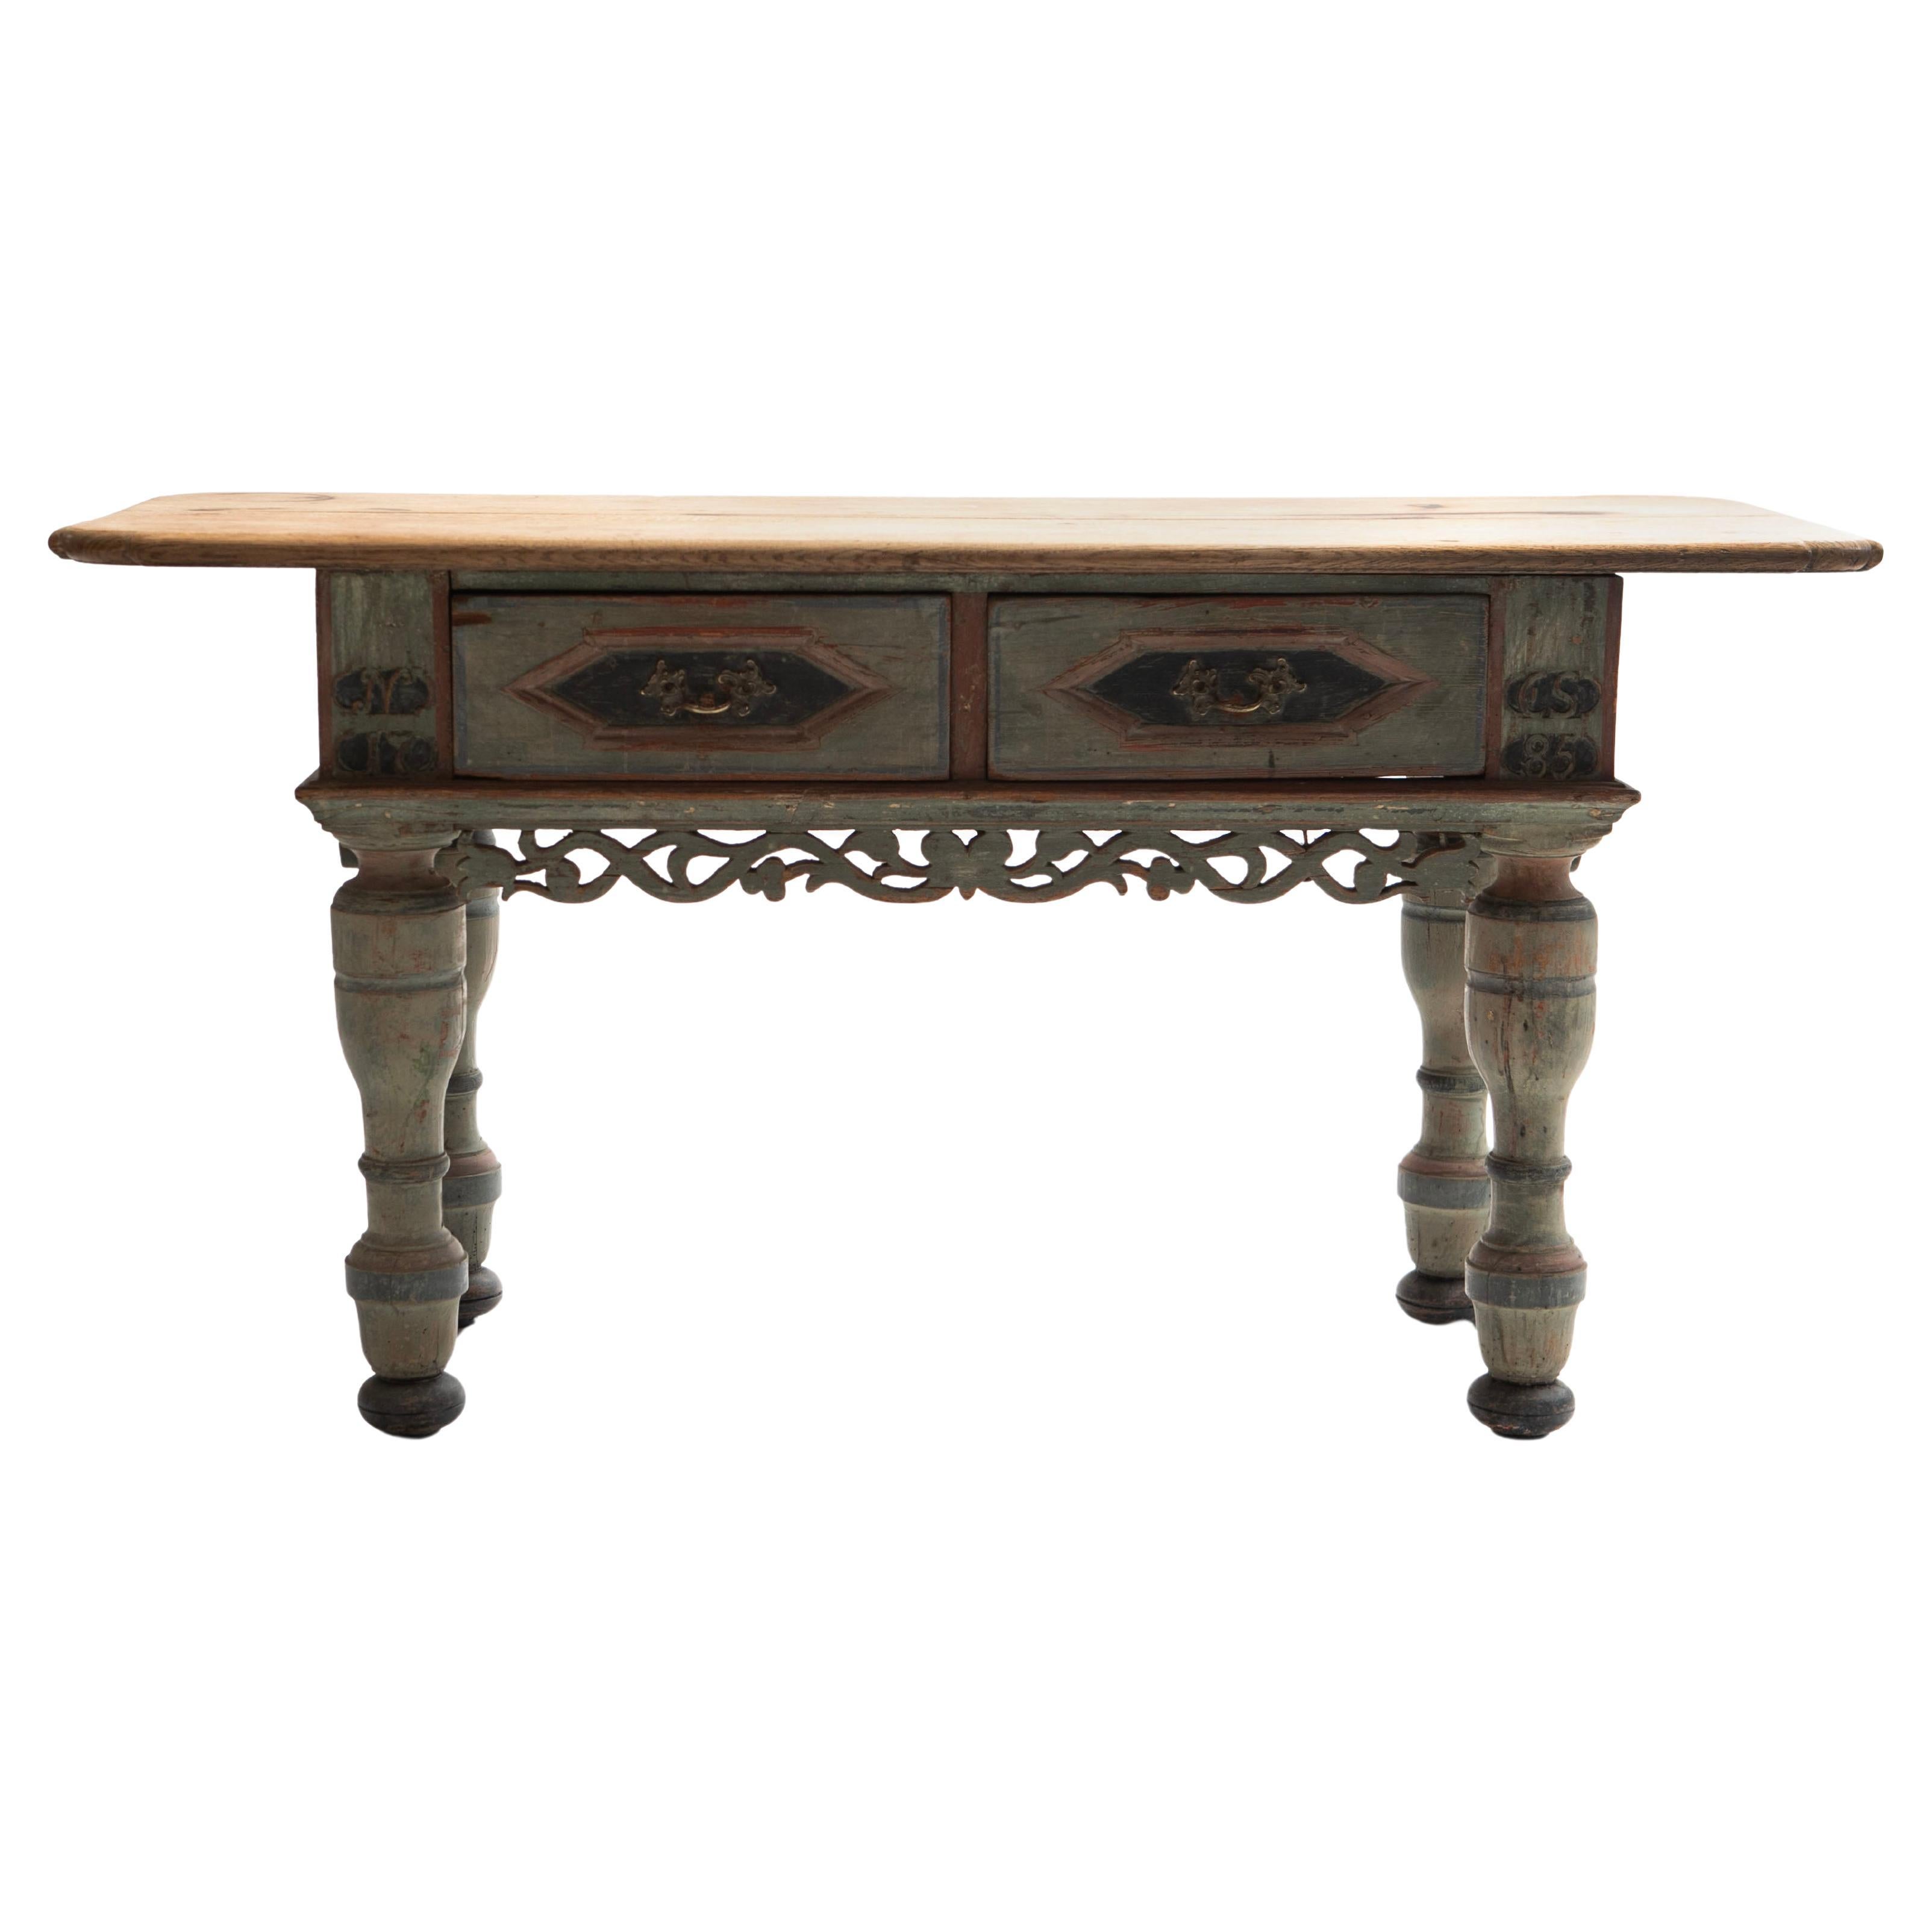 Danish 18th Century Baroque Table With Two Drawers and Original Paint For Sale